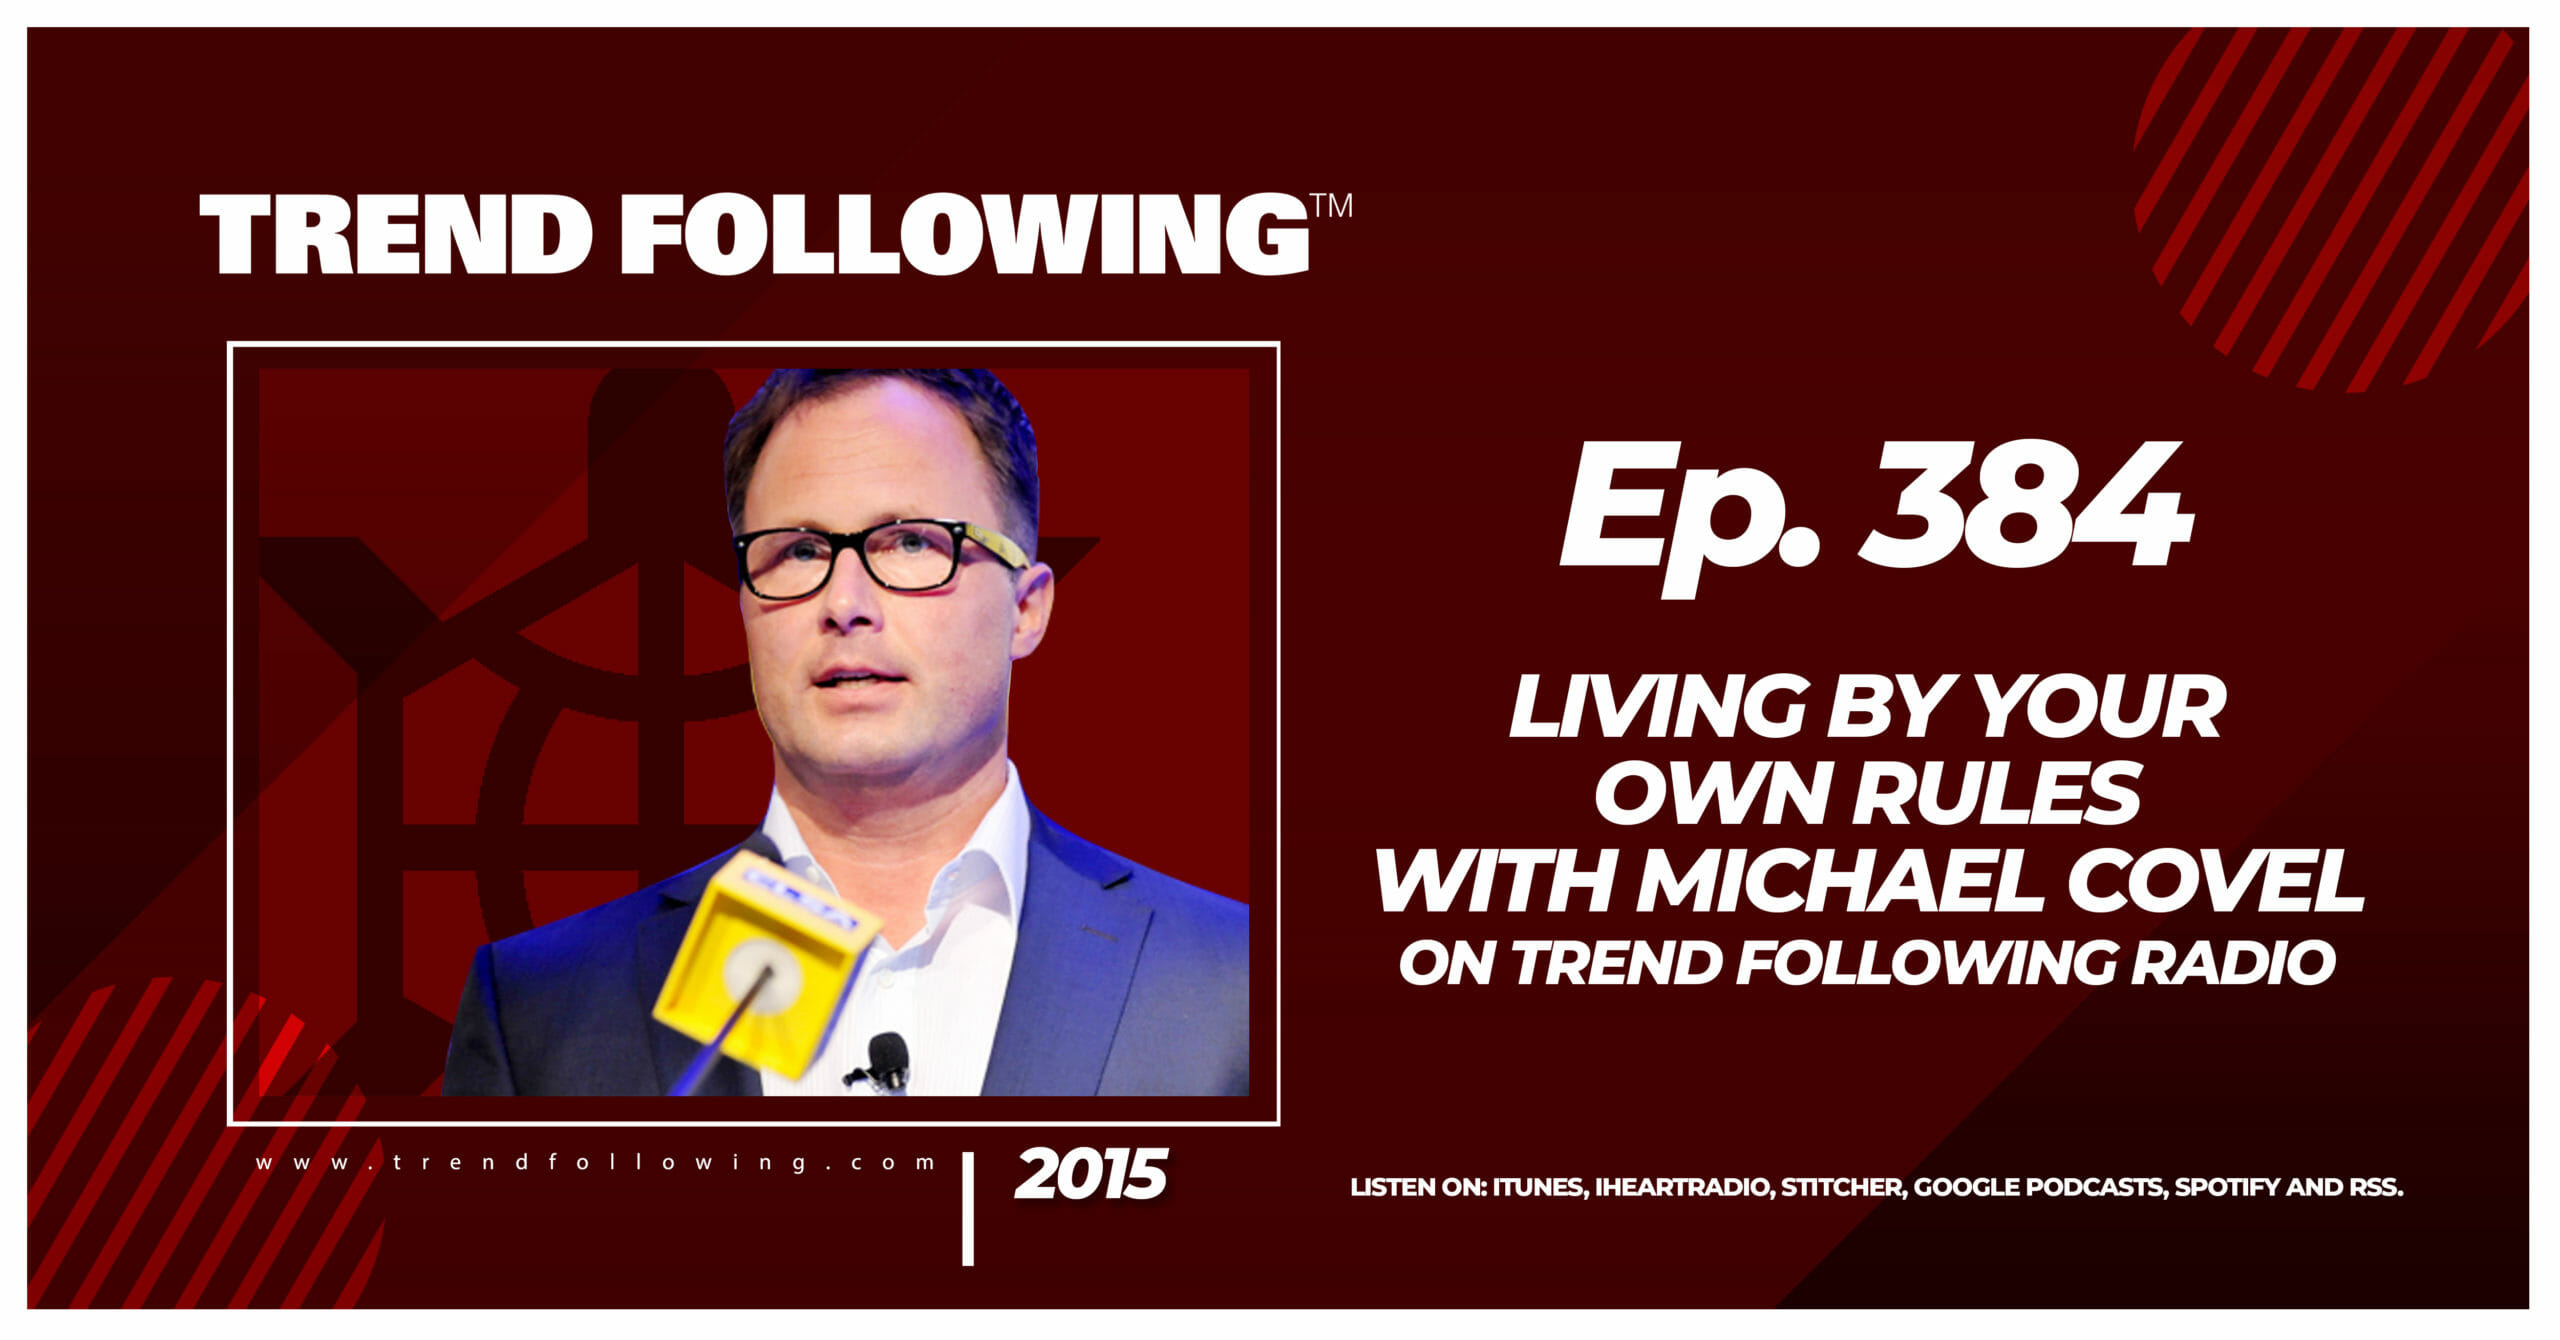 Living by Your Own Rules with Michael Covel on Trend Following Radio